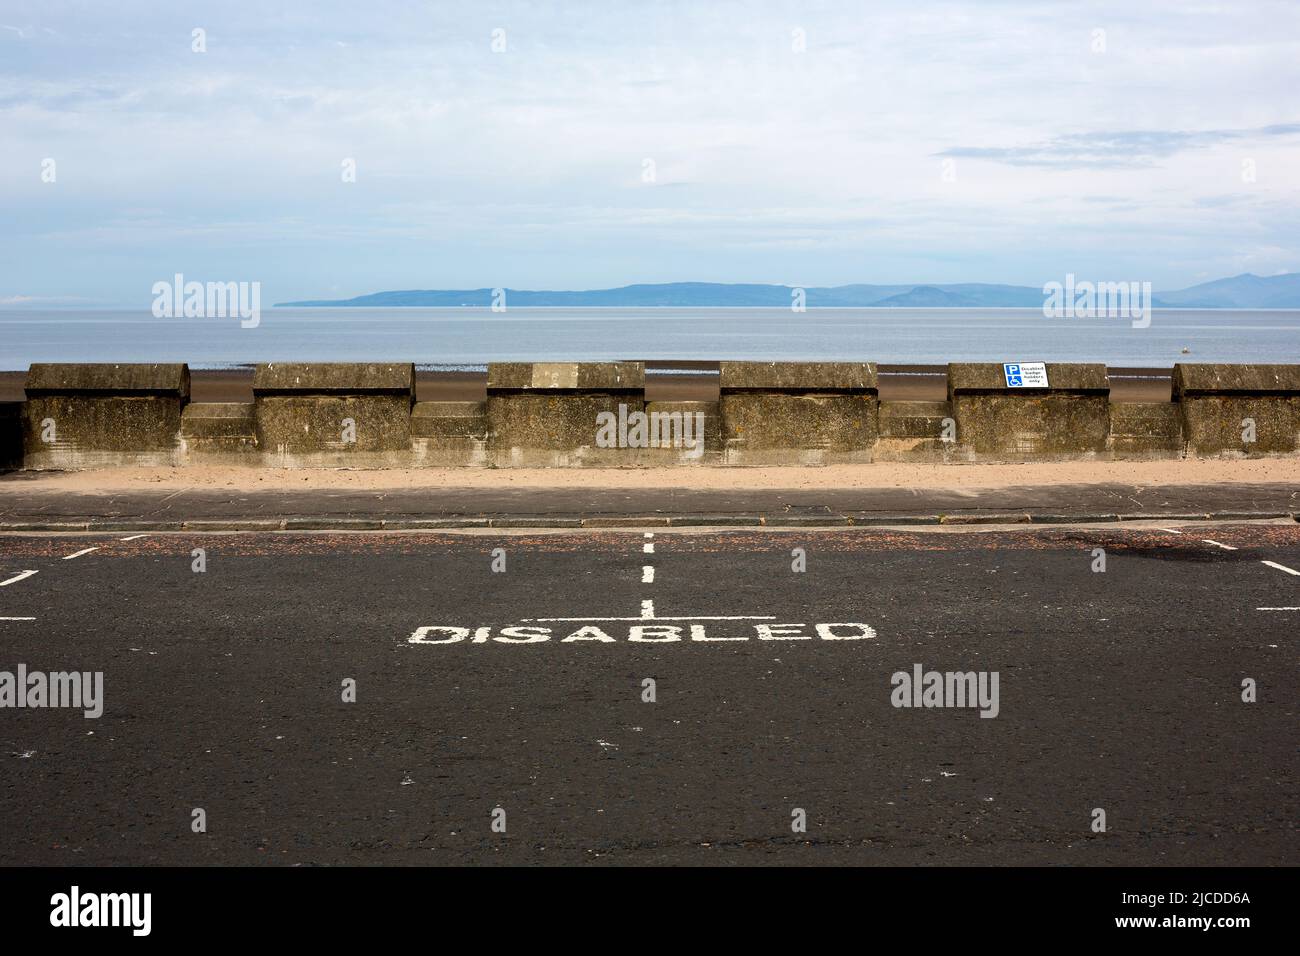 Disabled parking spaces at a coastal location Stock Photo